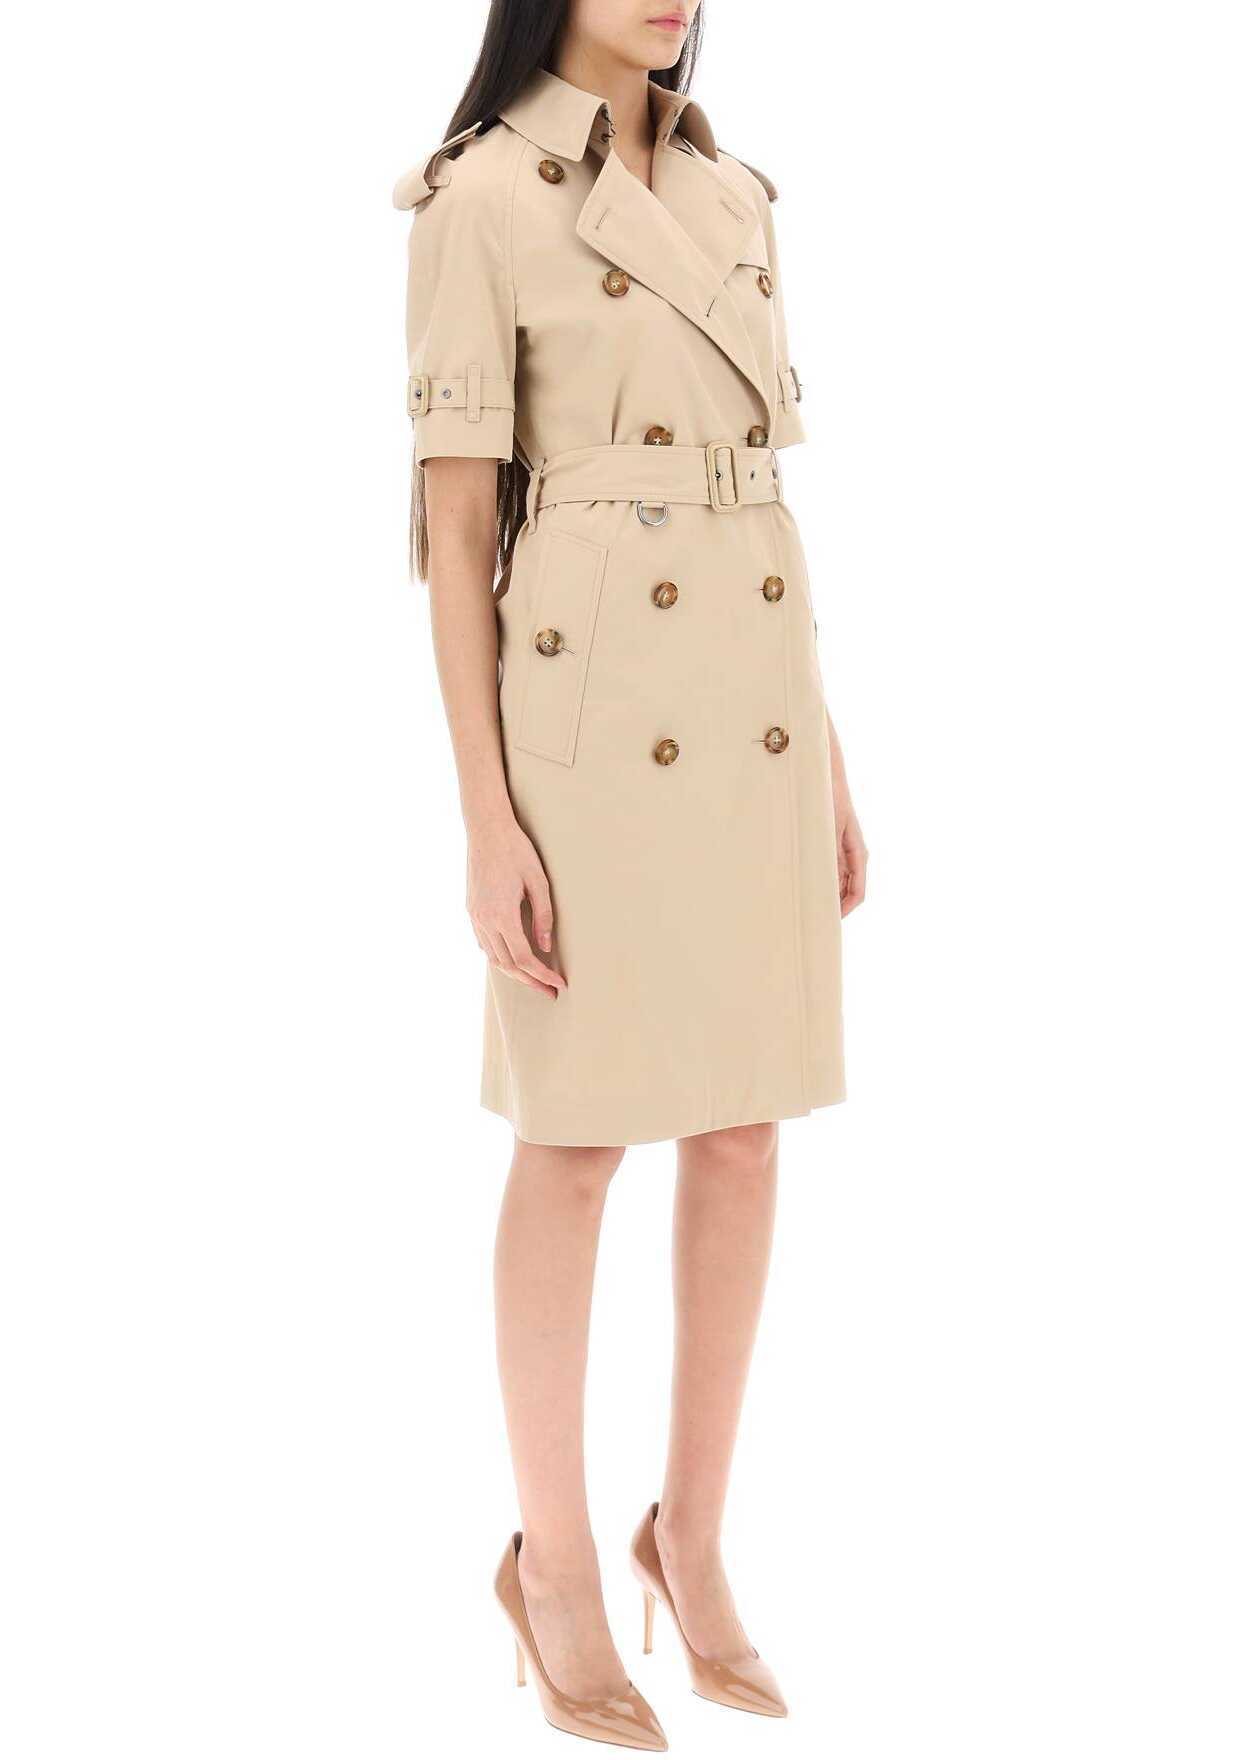 Burberry Short Sleeve Trench Coat SOFT FAWN